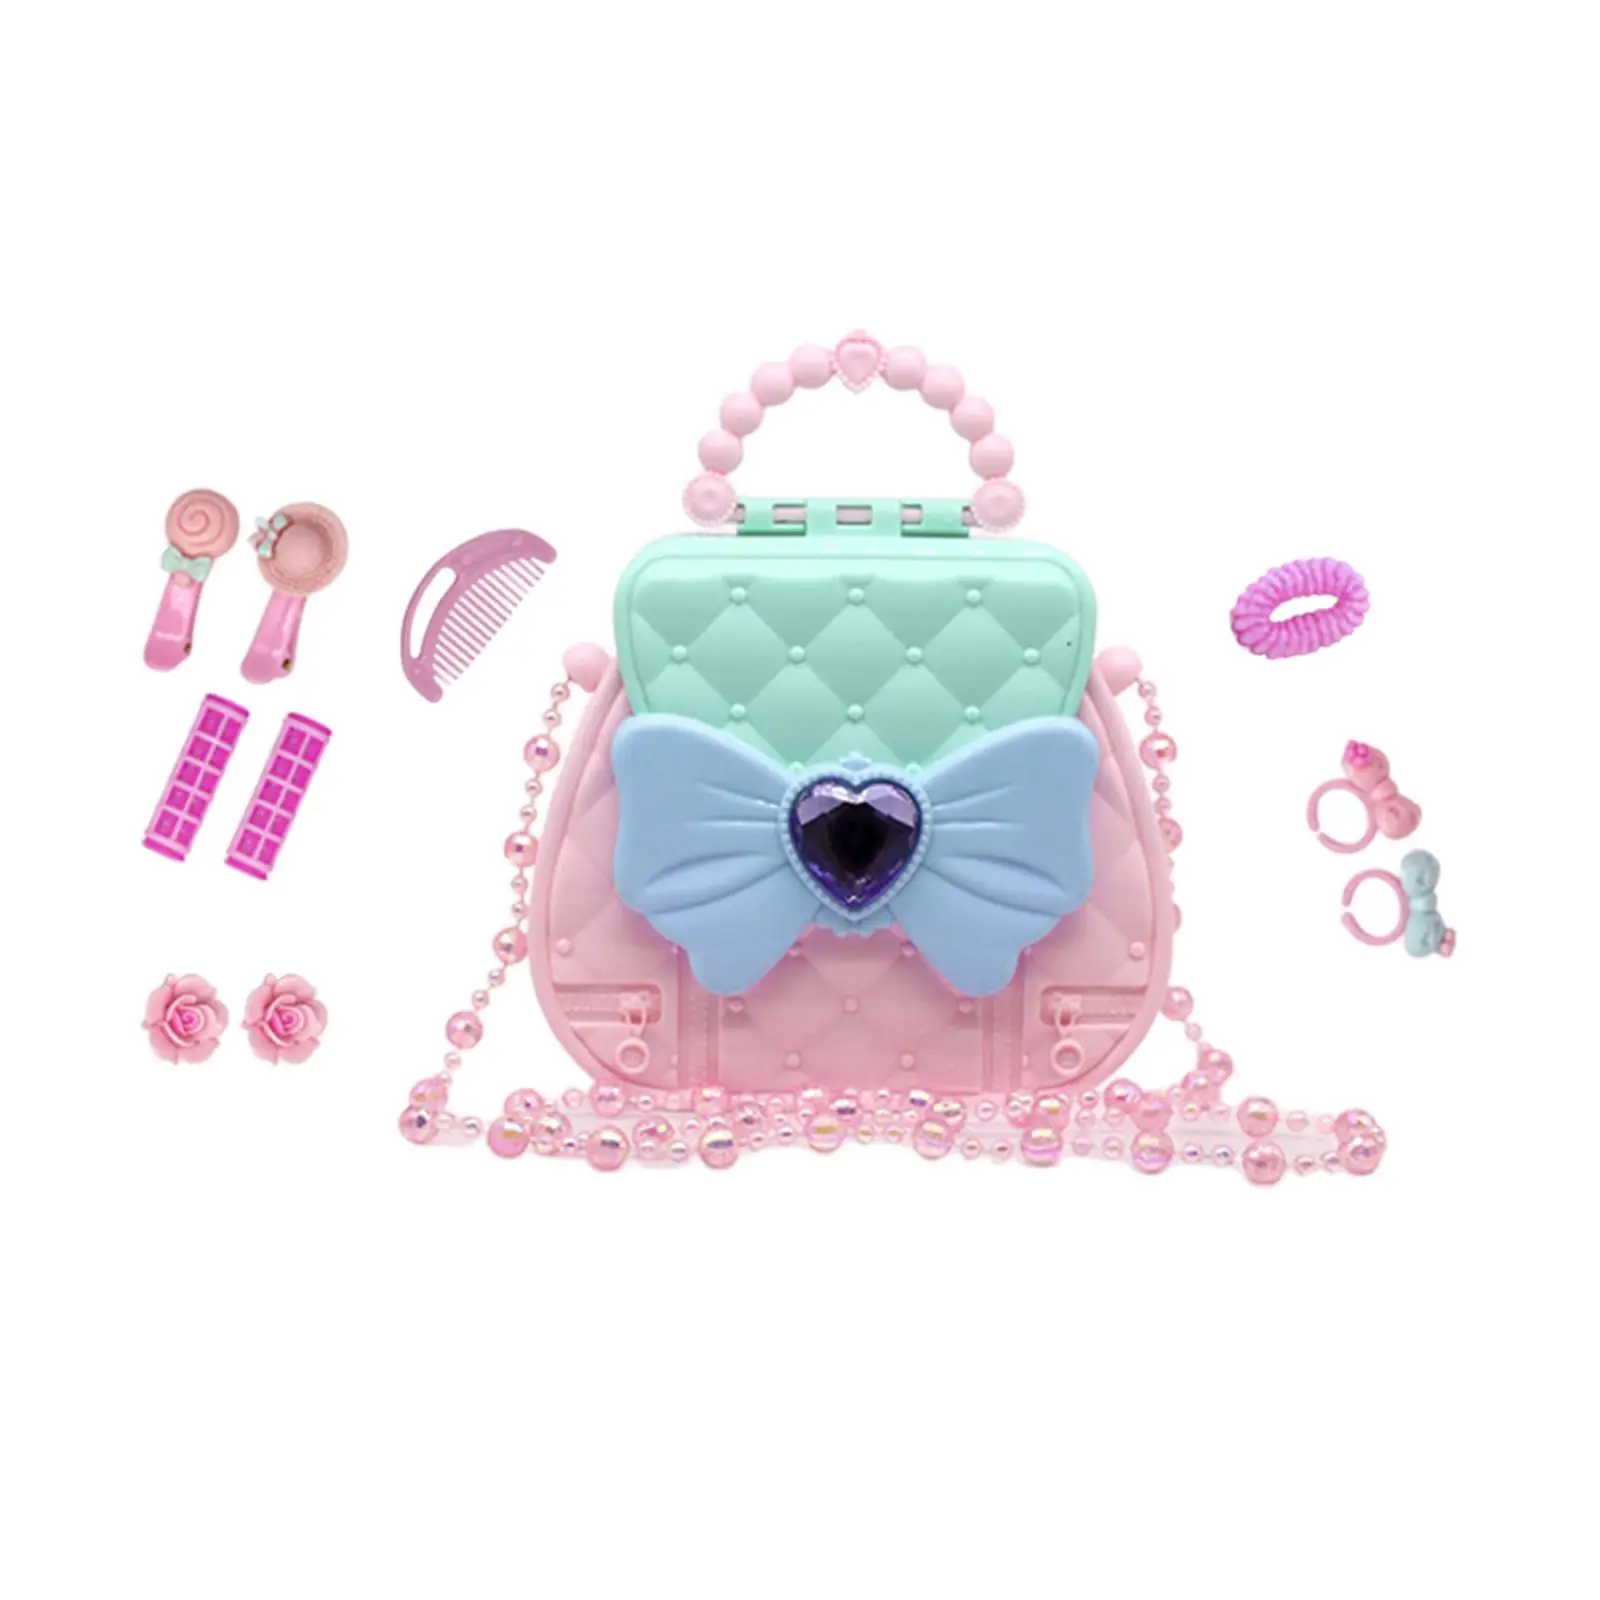 Pretend Play Handbag Toy Set Dress up Beauty Safety Materials Toddlers Purse Playset for Festivals Birthday New Year Holiday